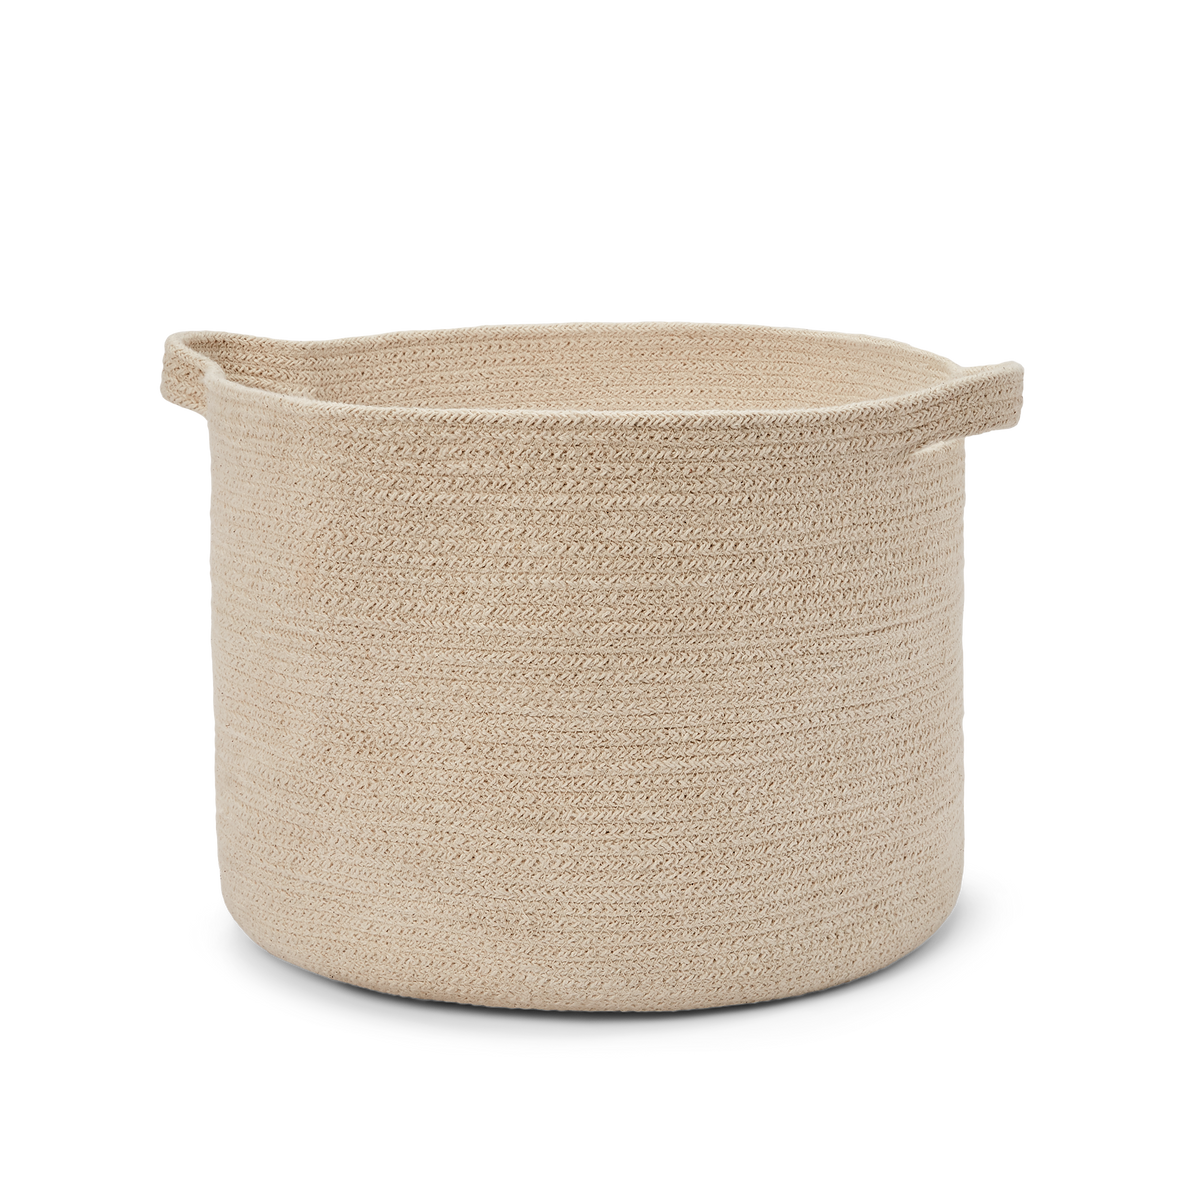 Side view, medium size fern organic cotton basket with handles, in natural cotton color.